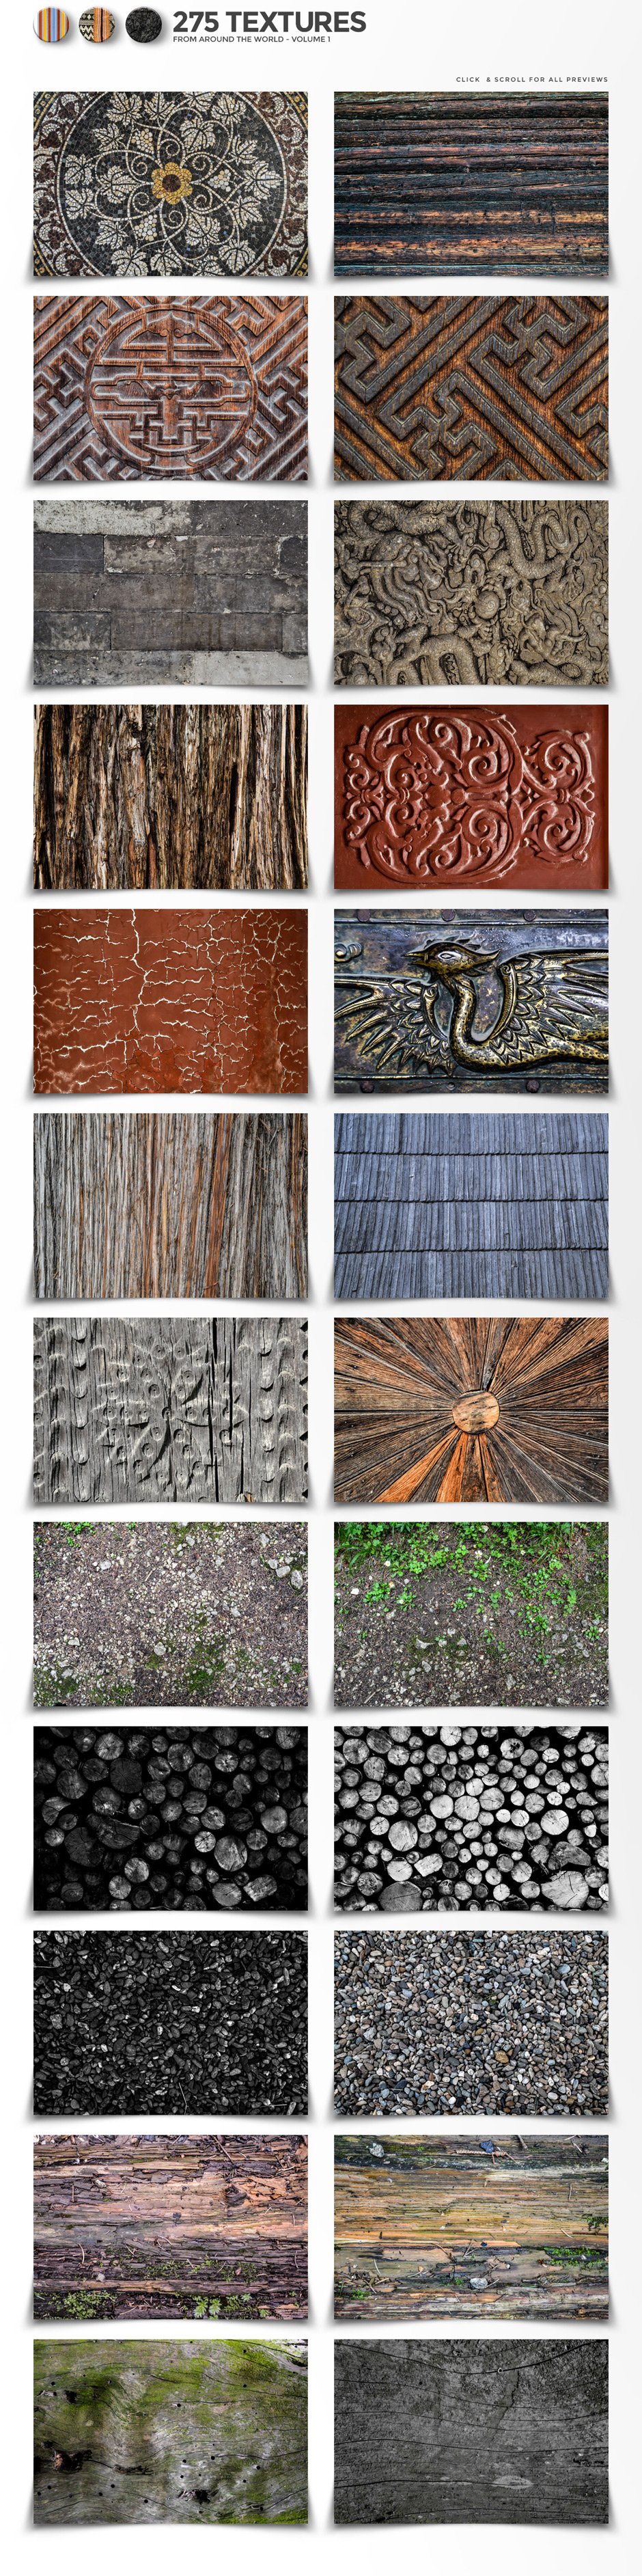 The Vibrant Textures and Patterns Bundle